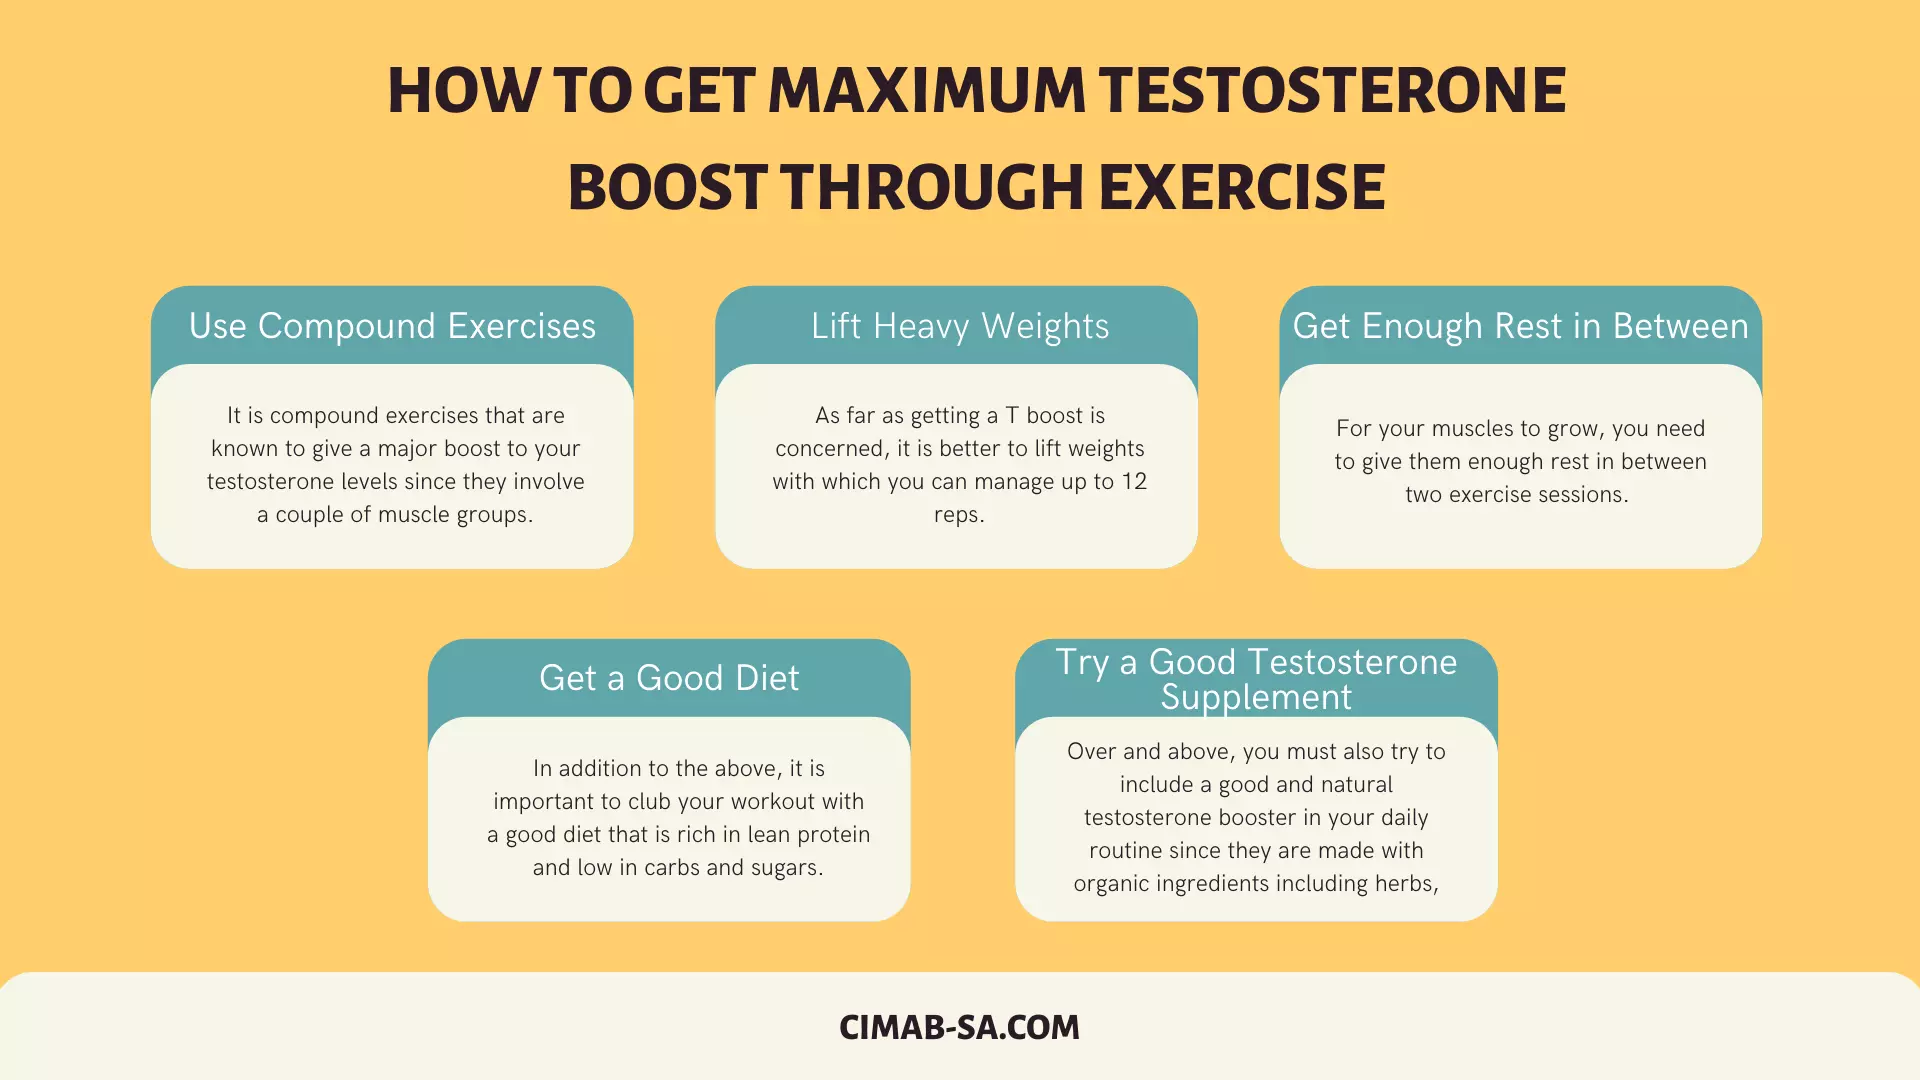 Does exercise increase testosterone